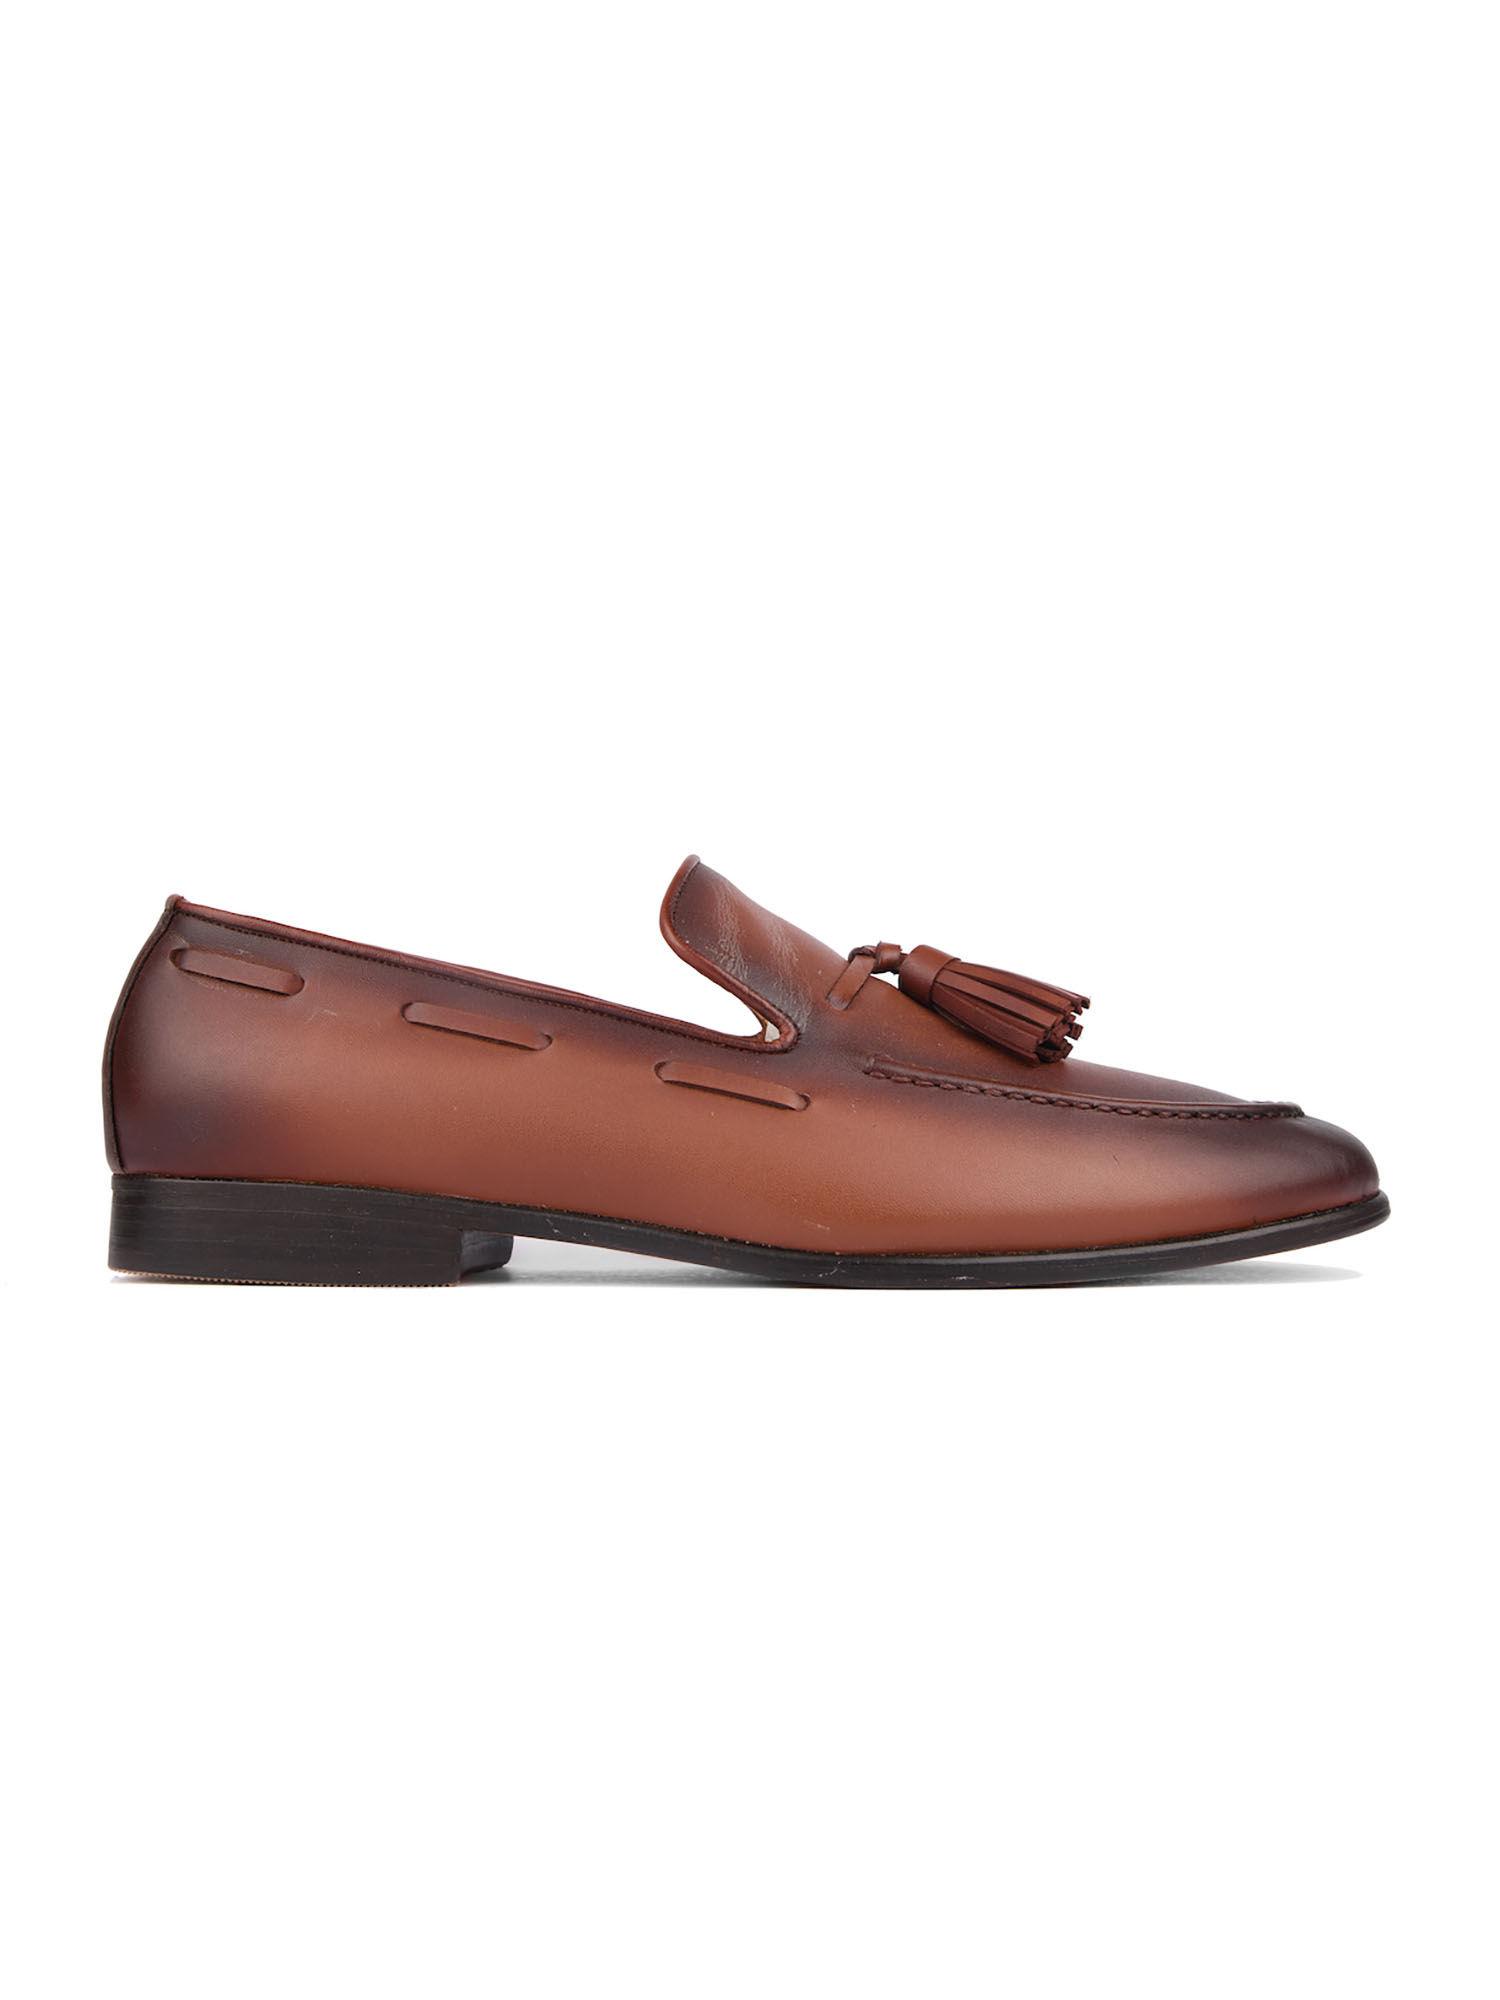 bari4-two-toned-tan-leather-loafers